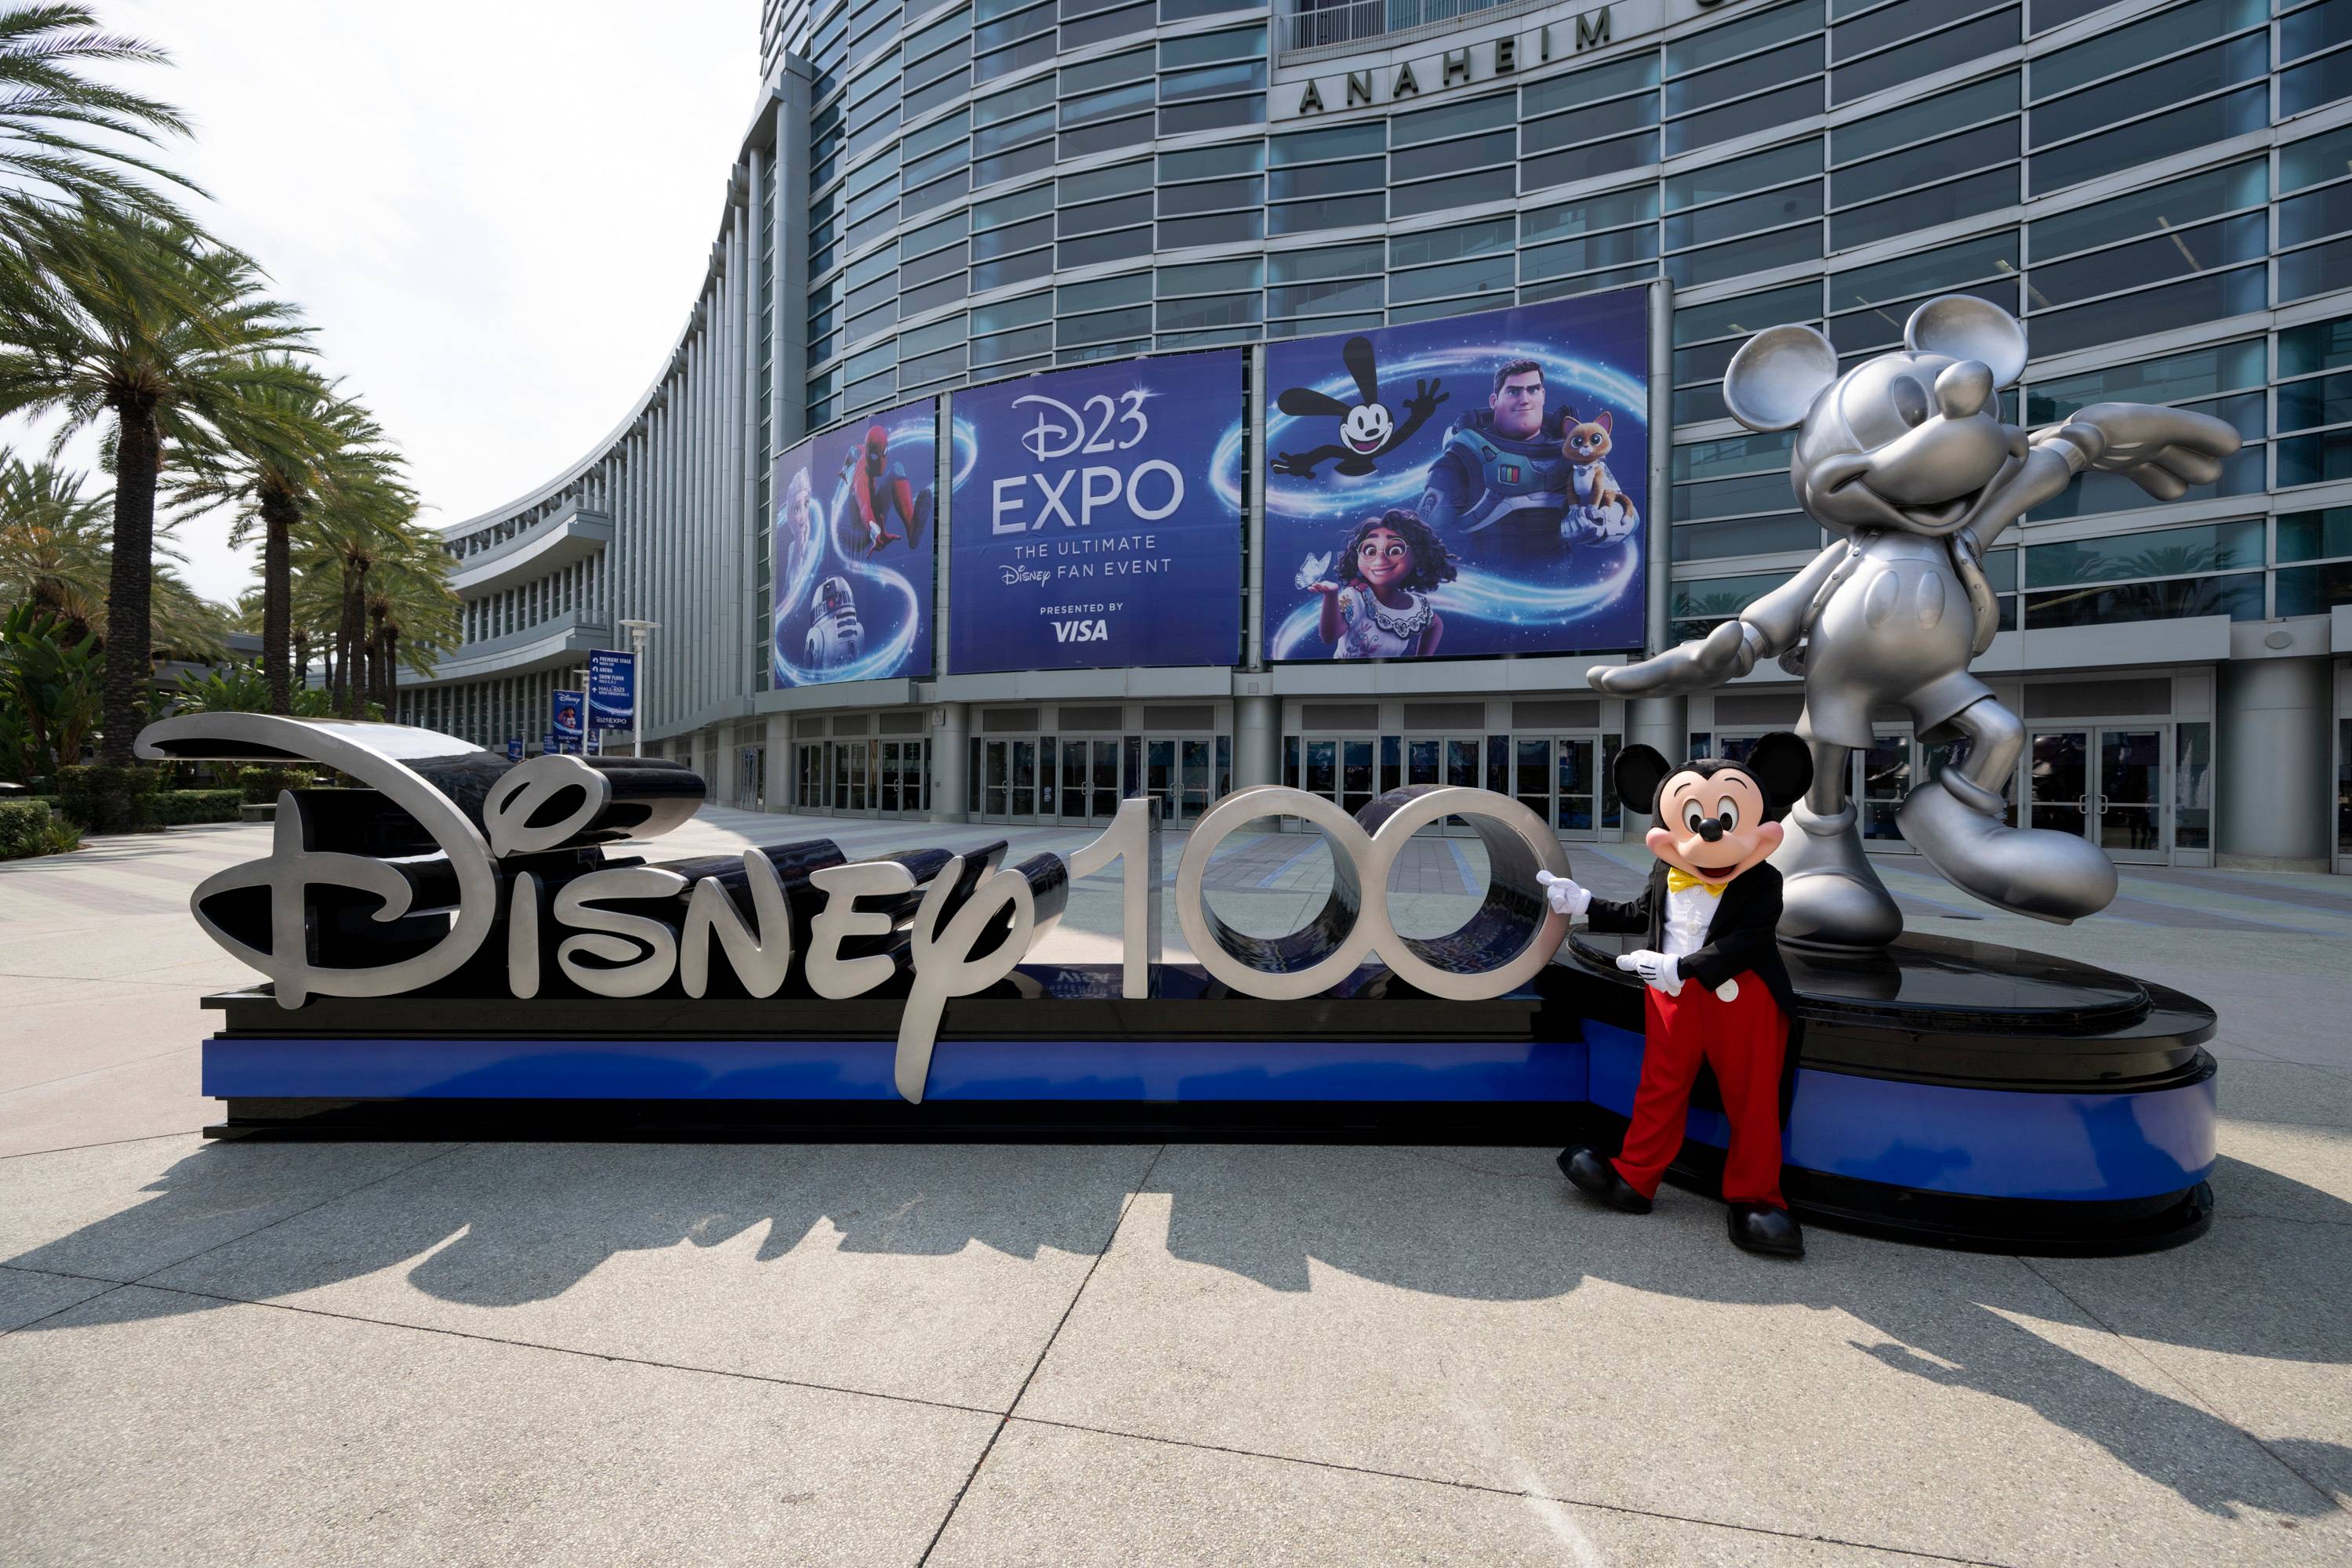 Disney's D23 fan club is reportedly downsizing as part of company-wide layoffs